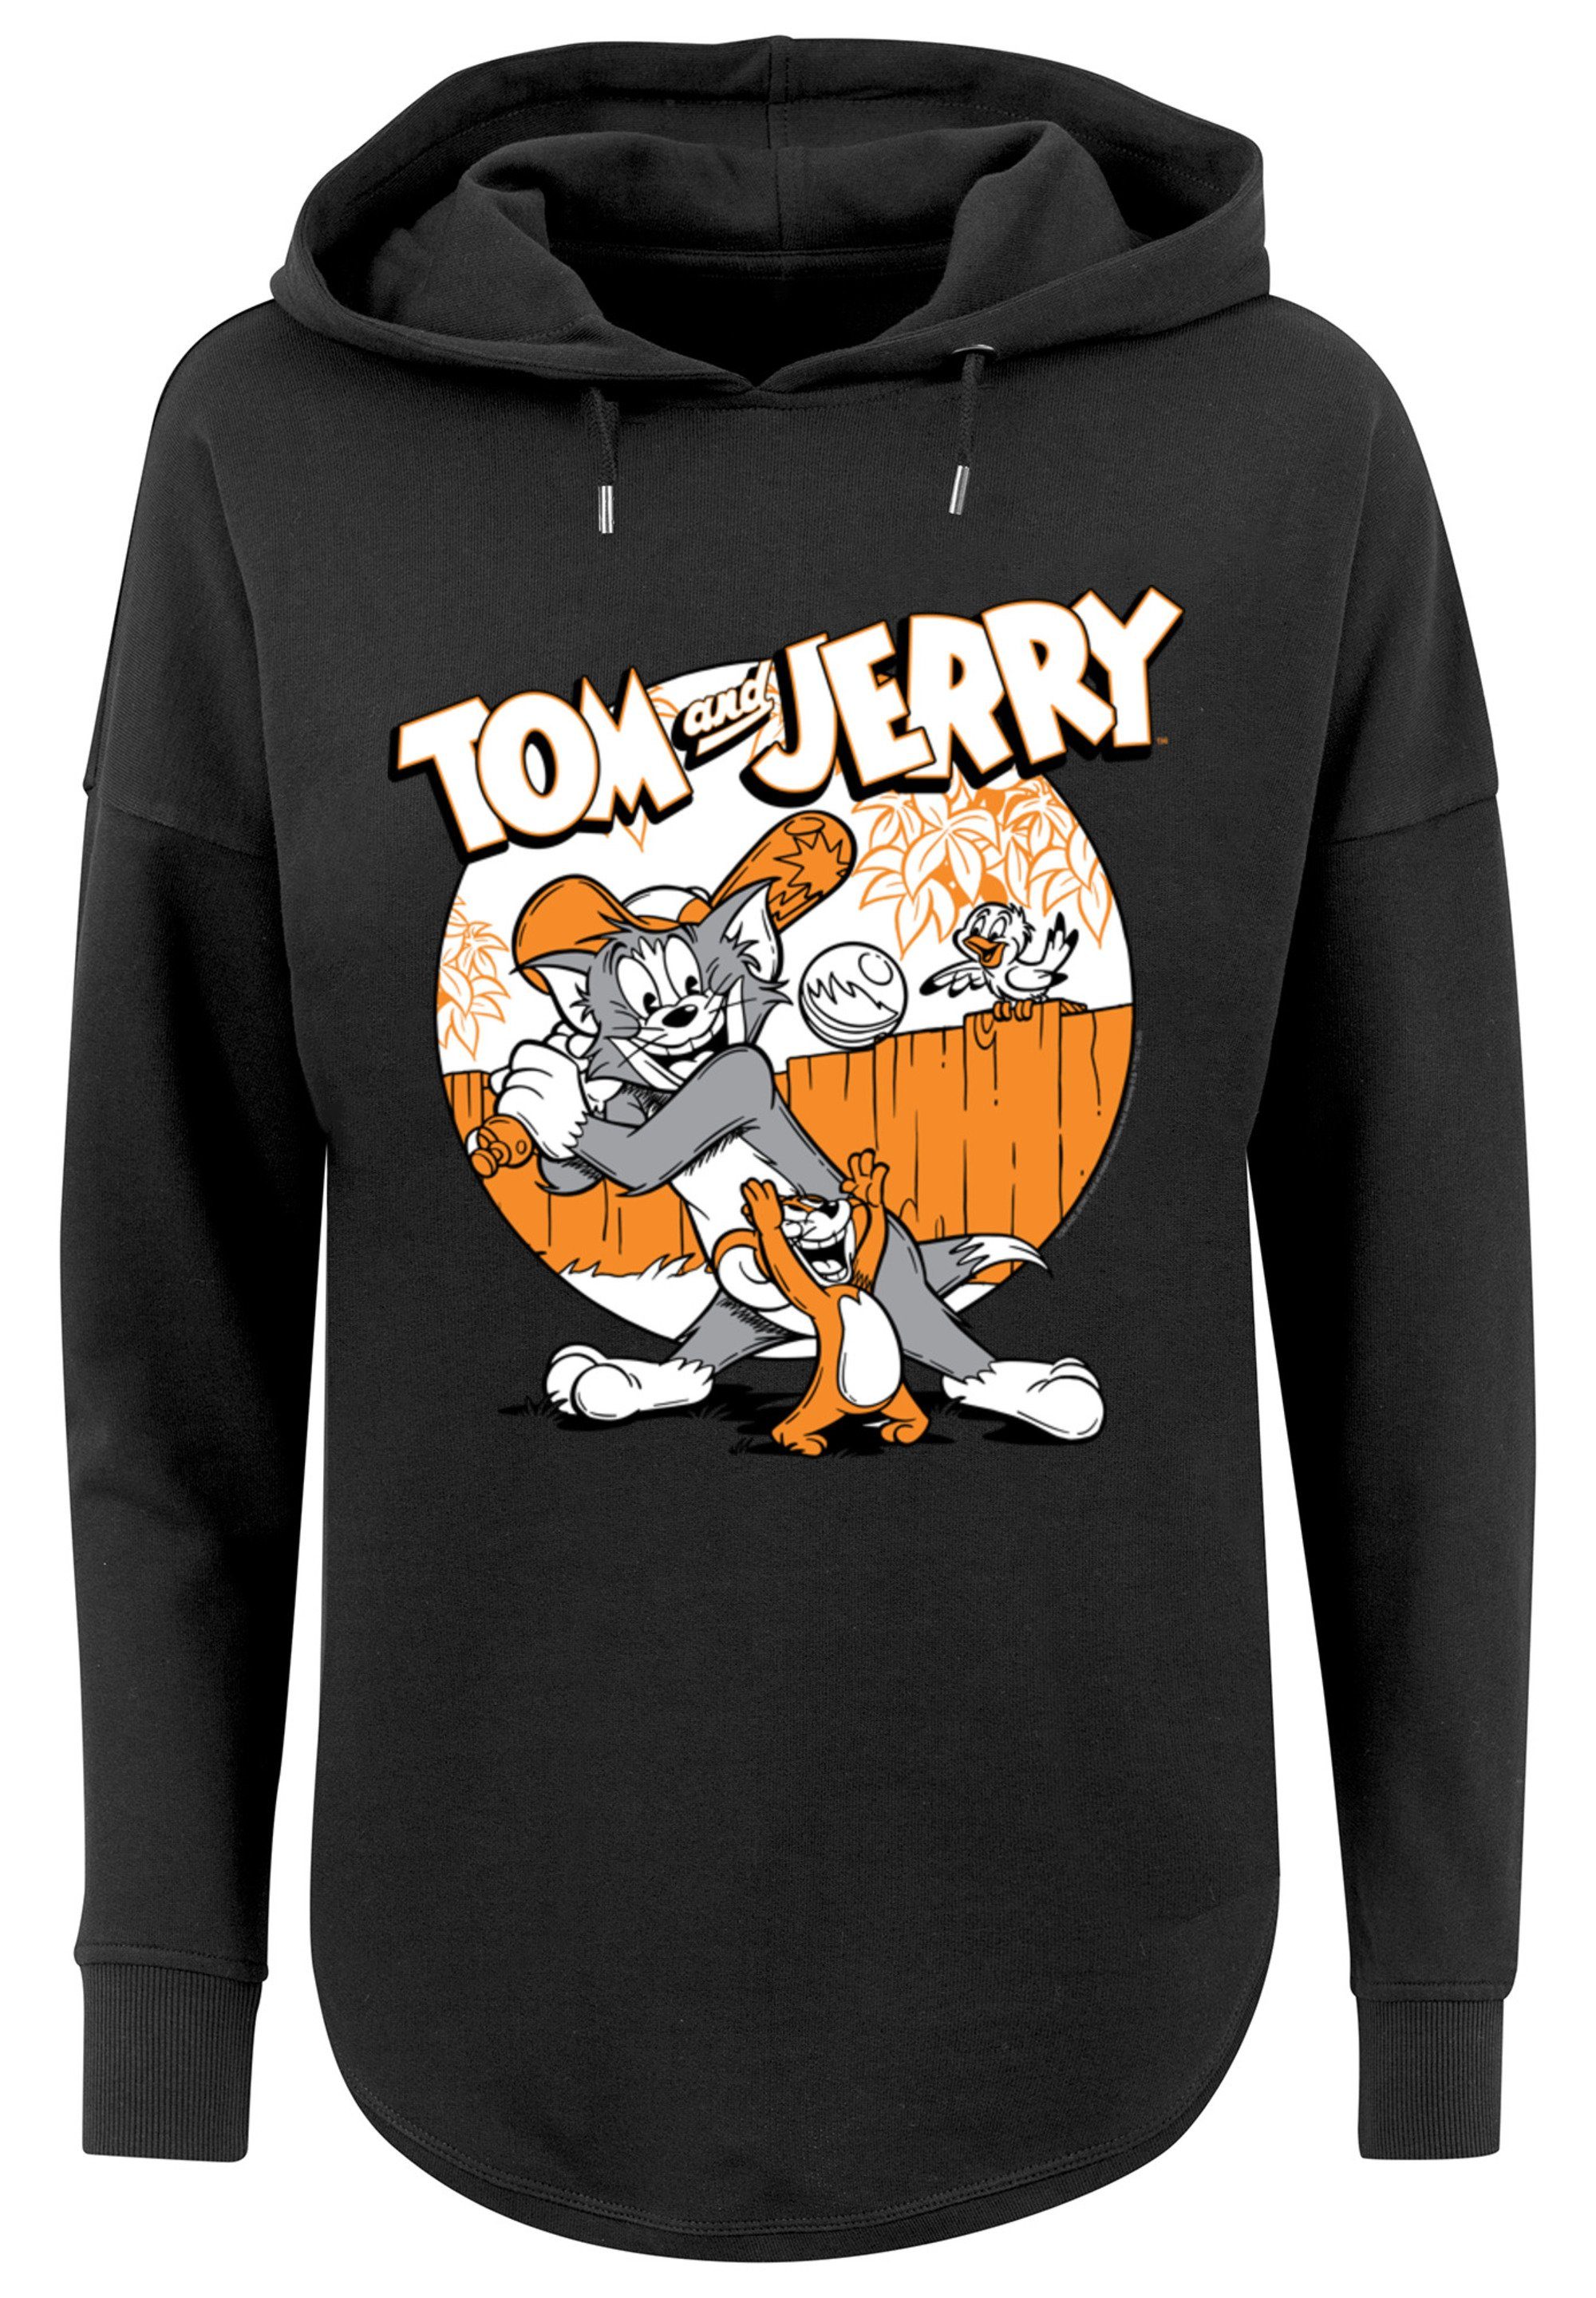 F4NT4STIC Kapuzenpullover Damen Tom And Jerry Play Baseball with Ladies Oversized Hoody (1-tlg)